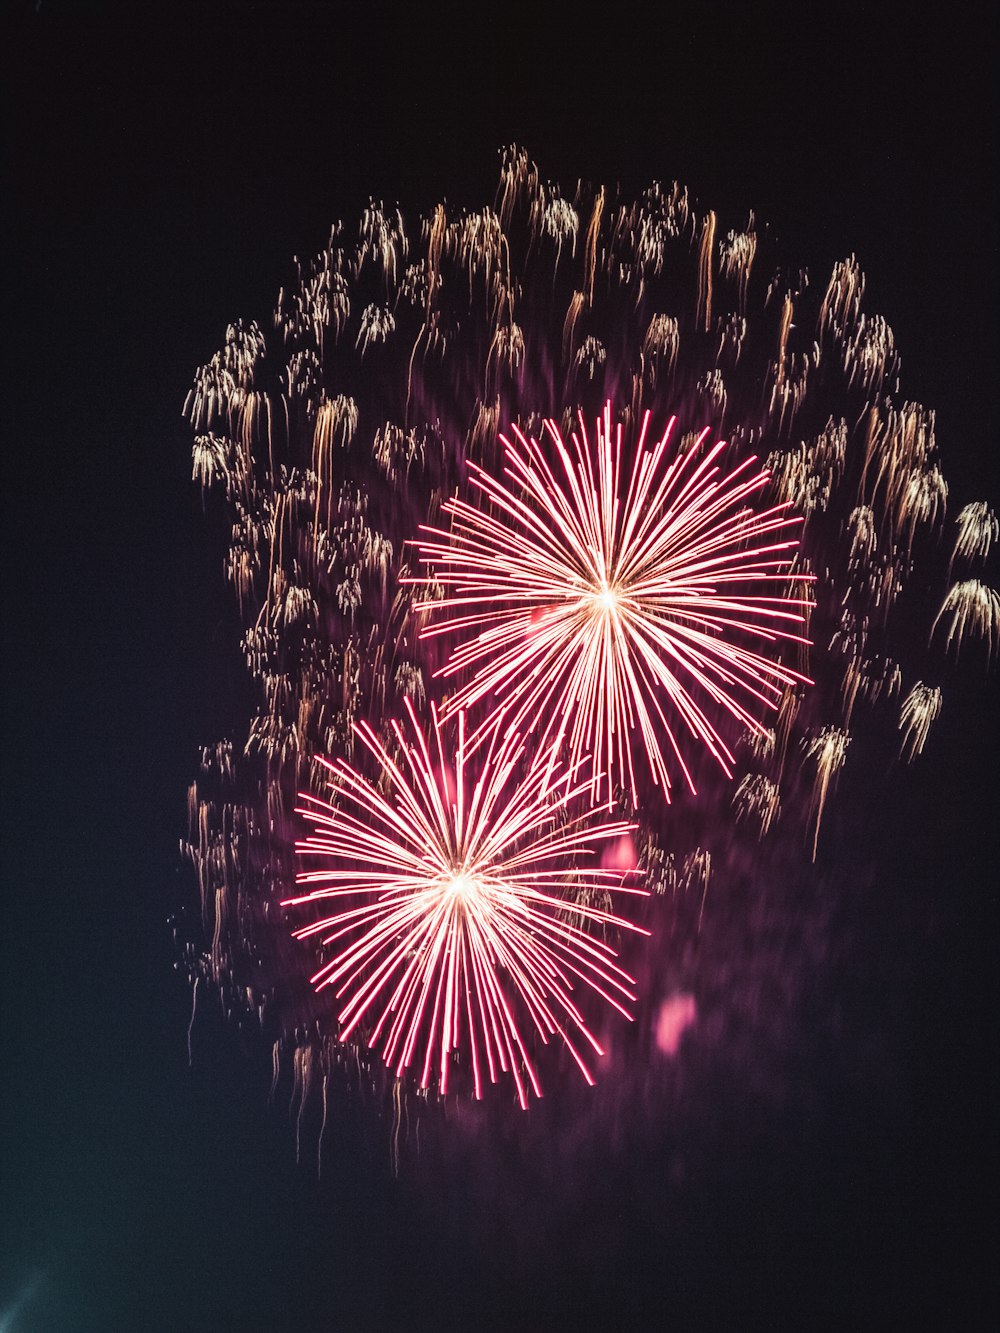 photography of fireworks during nighttime